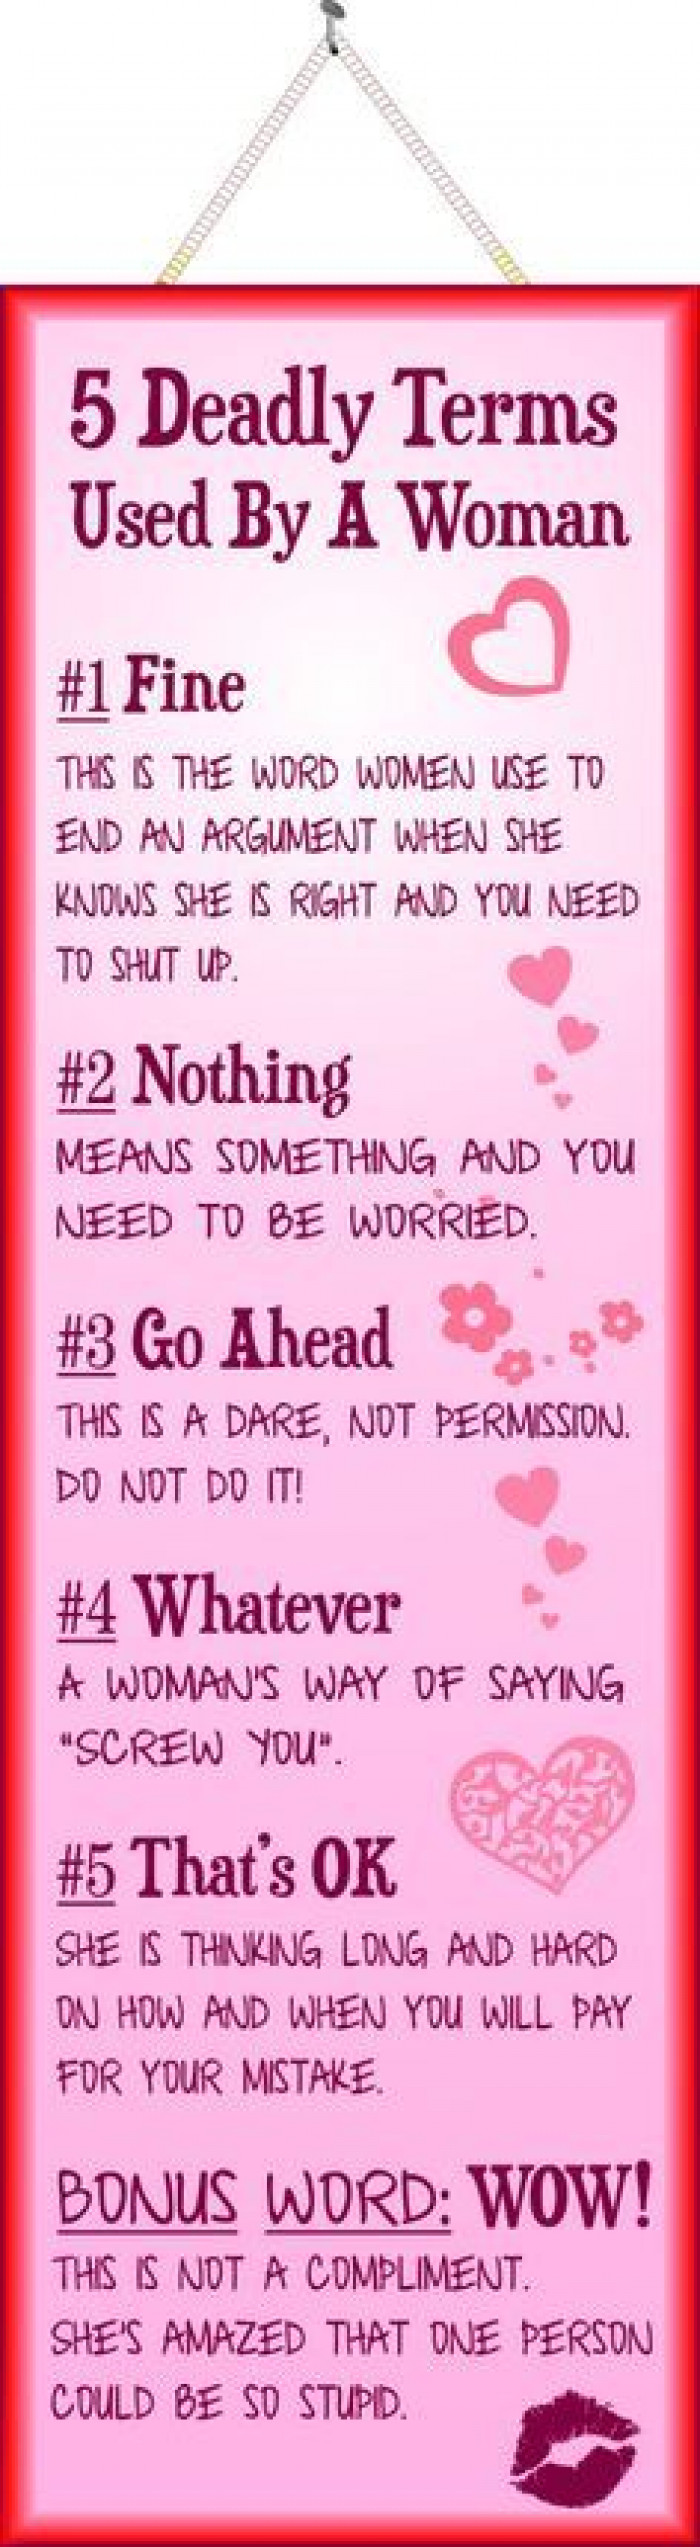 5 Deadly Terms Used By A Woman